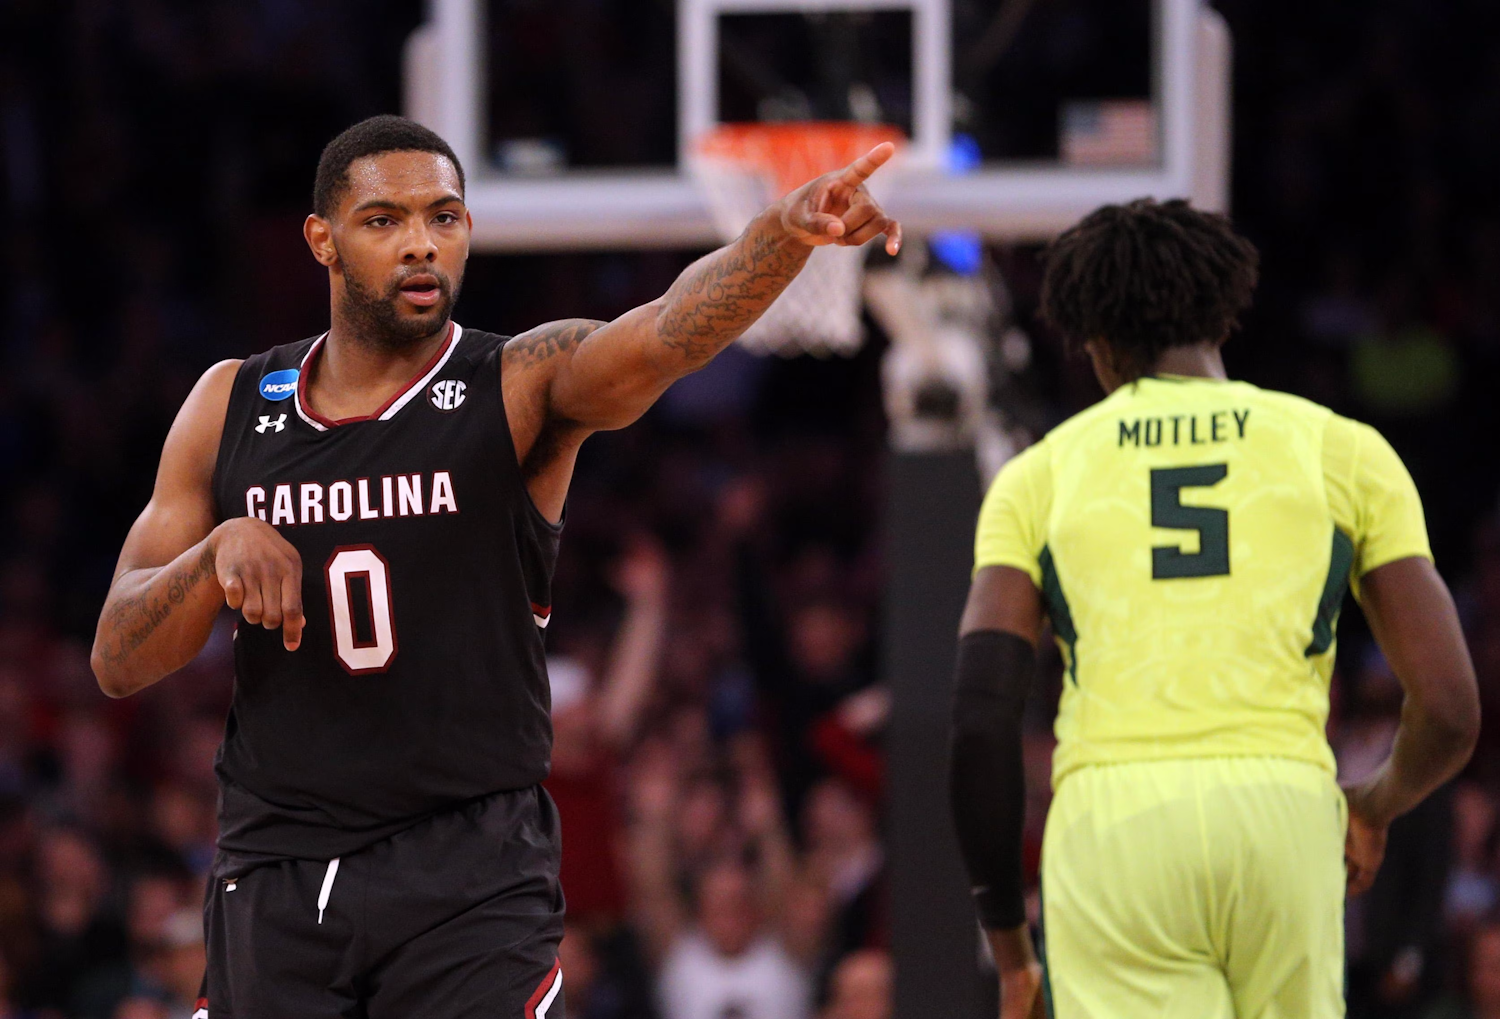 NCAA March Madness starts today. The tournament featured 30 current League players